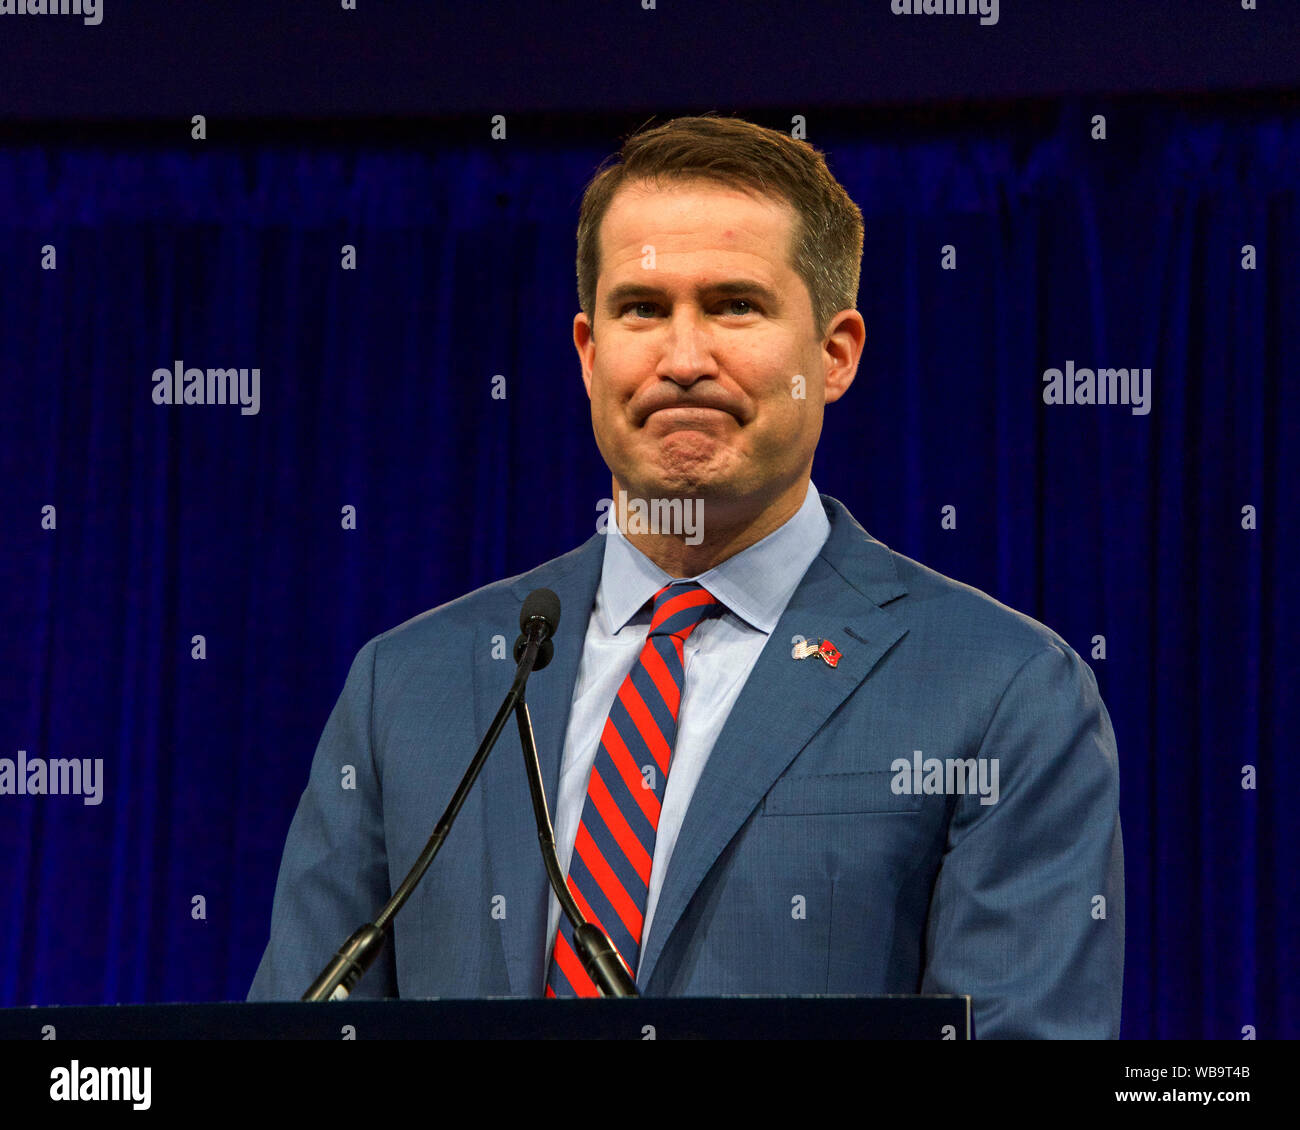 San Francisco, CA - August 23, 2019: Presidential candidate Seth Moulton speaking at the Democratic National Convention summer session, announcing his Stock Photo